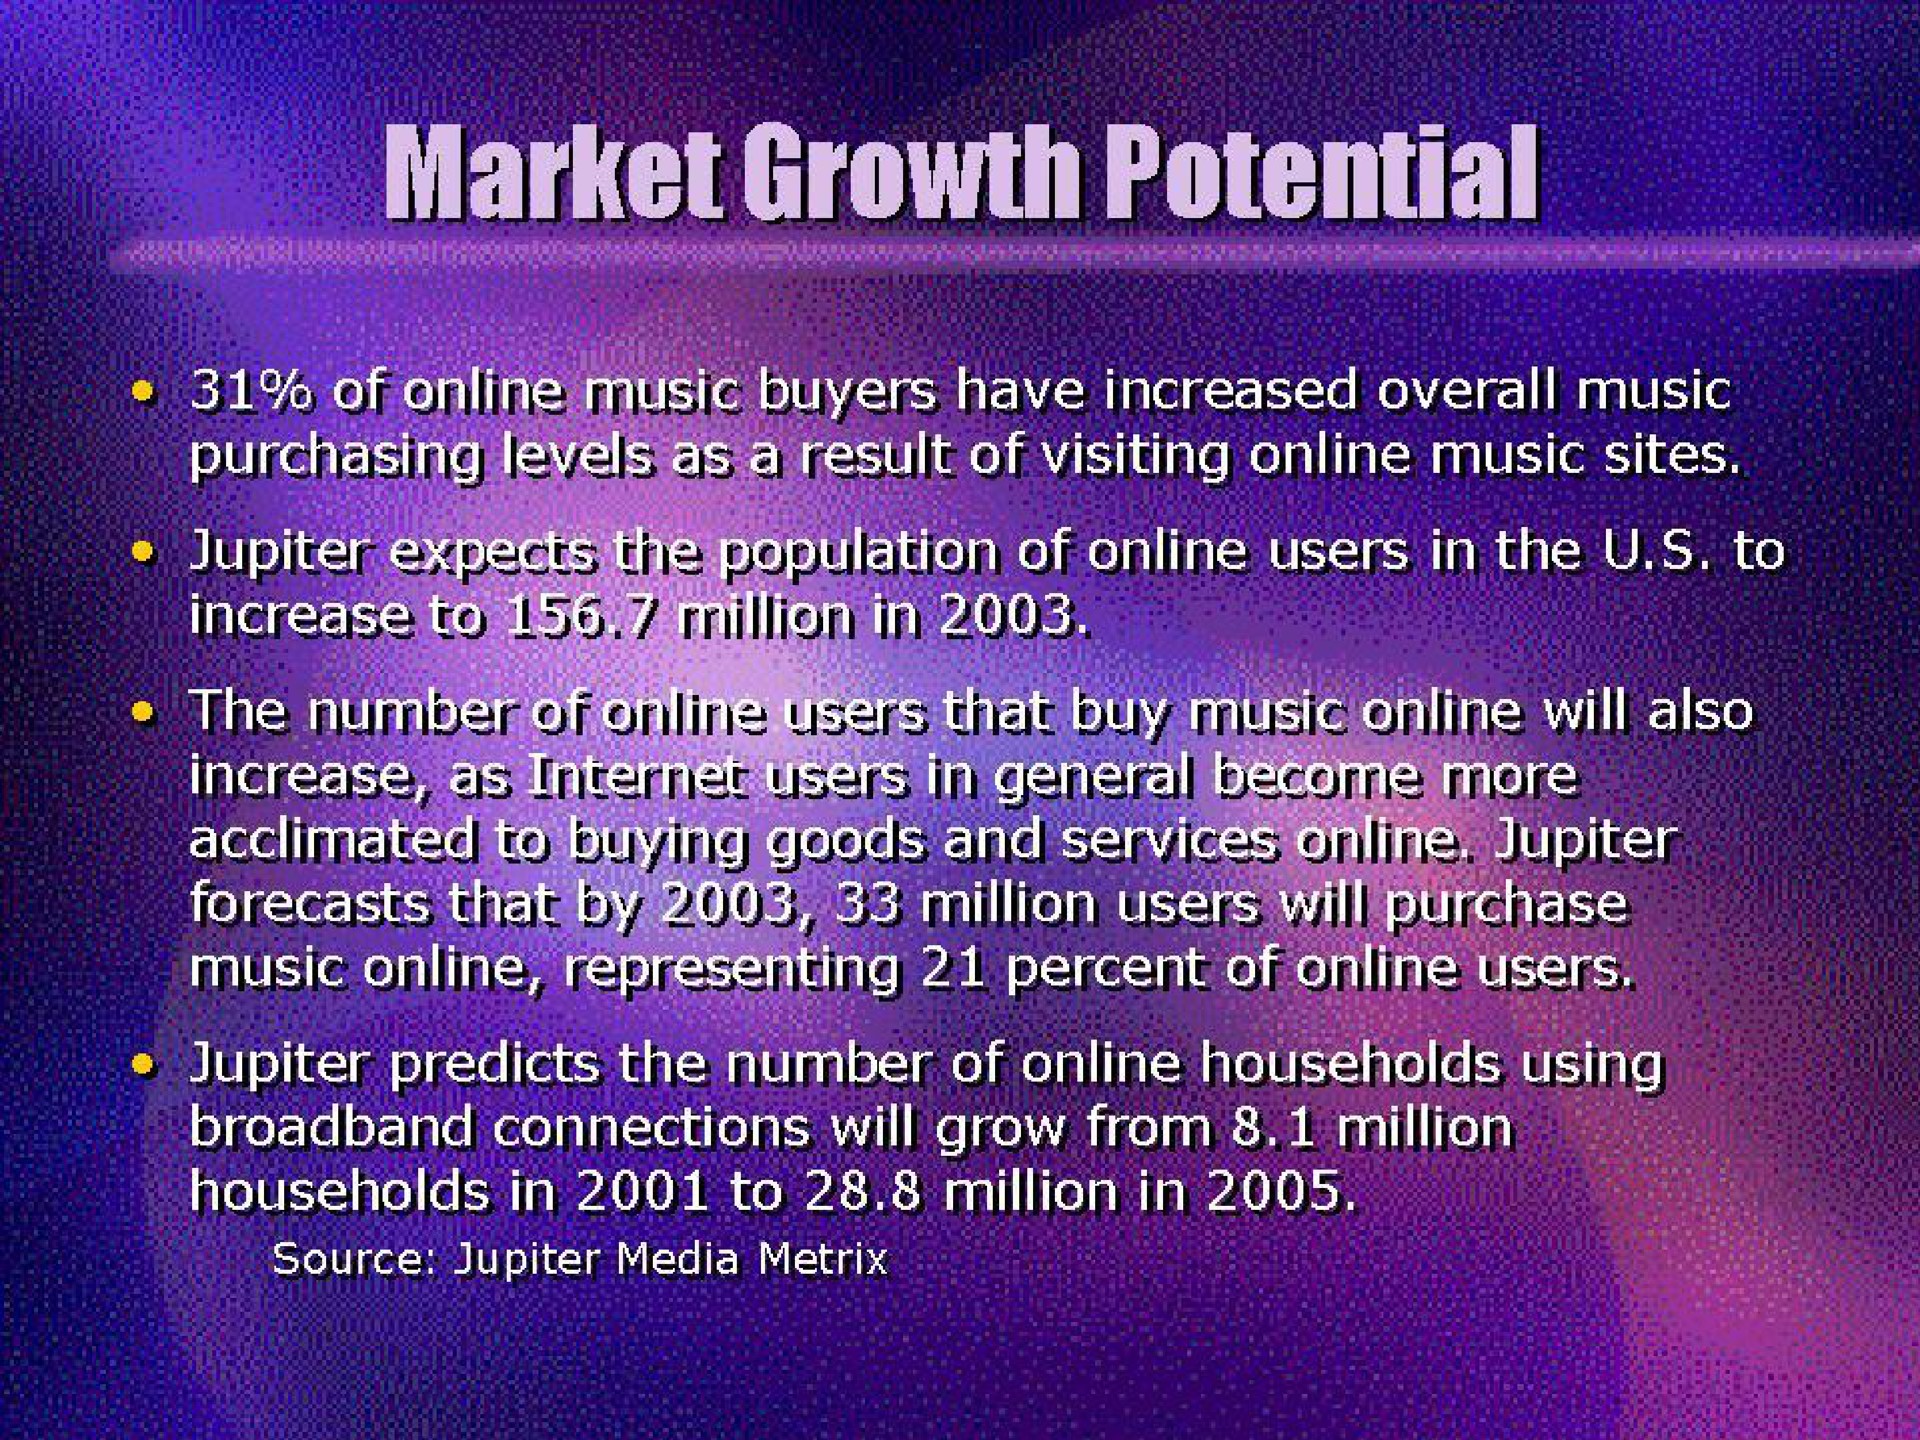 market growth connections i grow from households in to million in | Universal Music Group